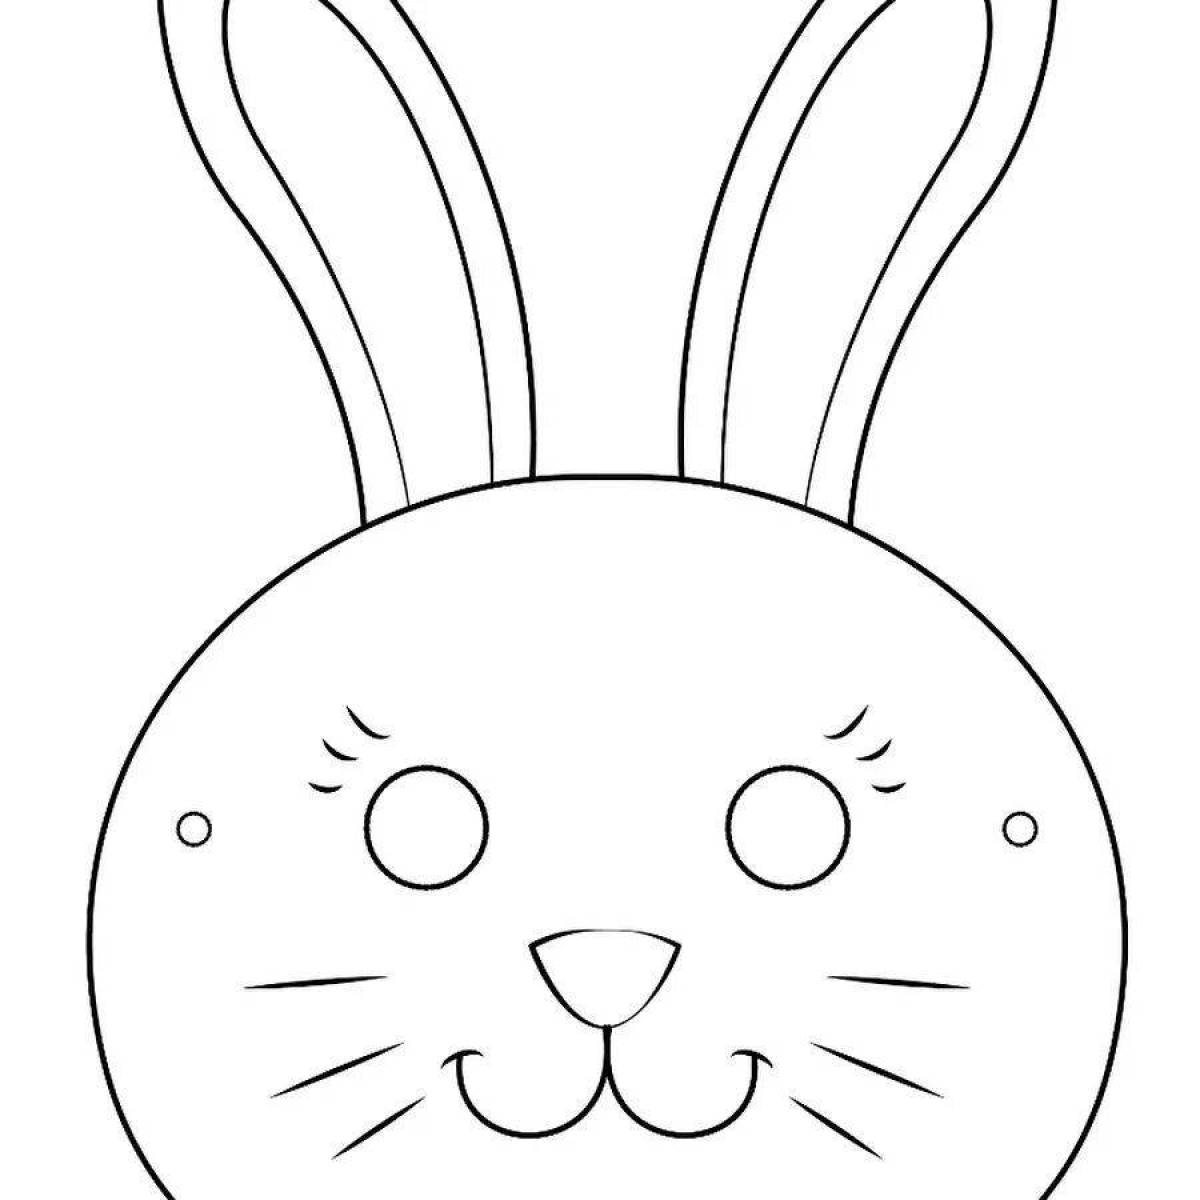 Sparkling Bunny Mask Coloring Page